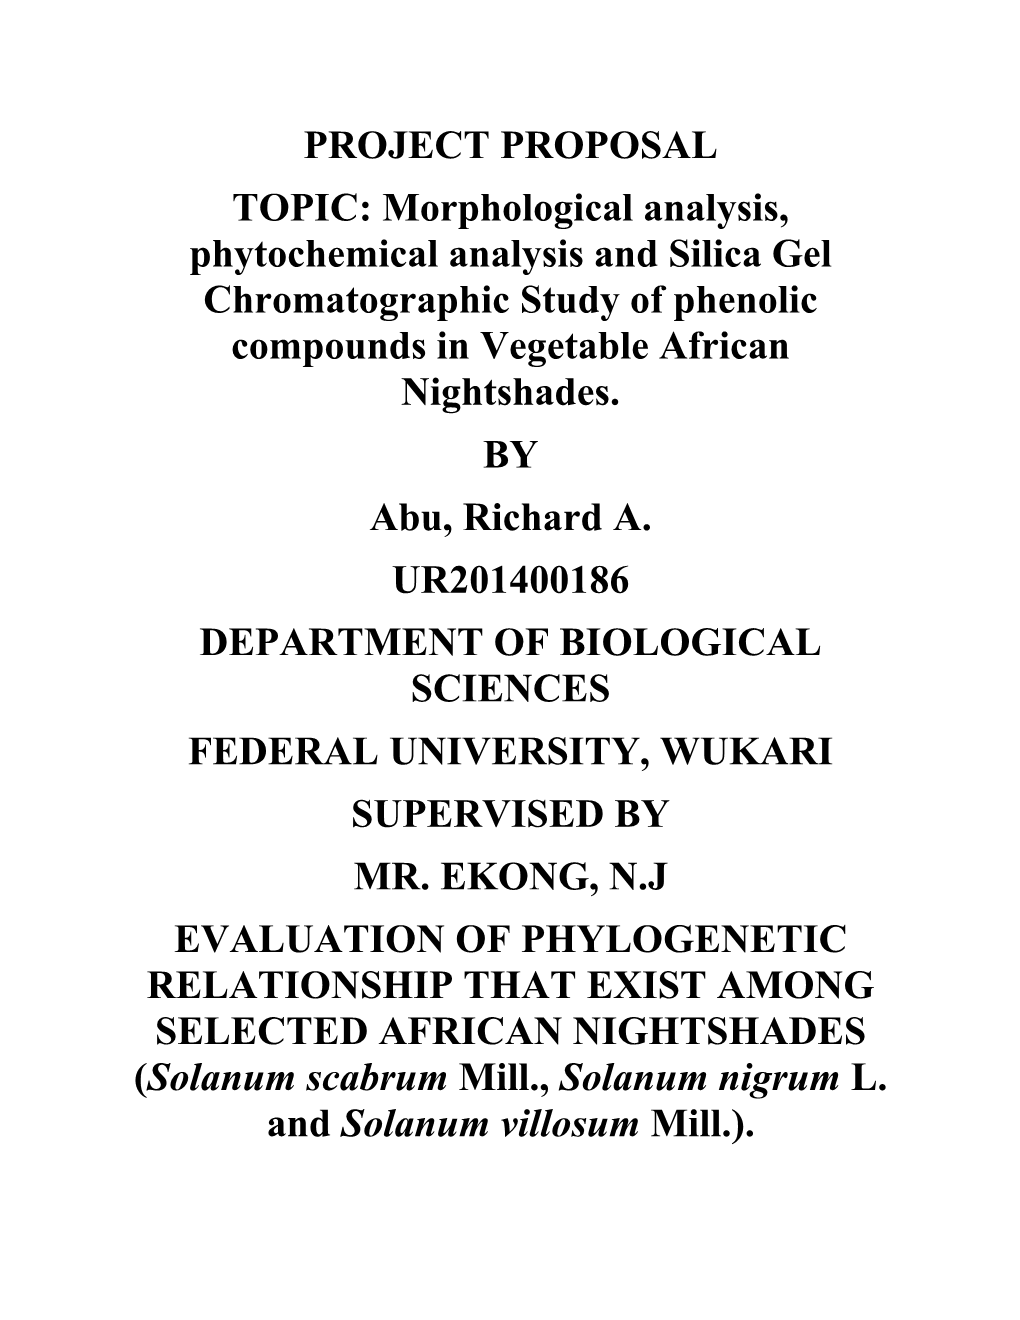 PROJECT PROPOSAL TOPIC: Morphological Analysis, Phytochemical Analysis and Silica Gel Chromatographic Study of Phenolic Compounds in Vegetable African Nightshades